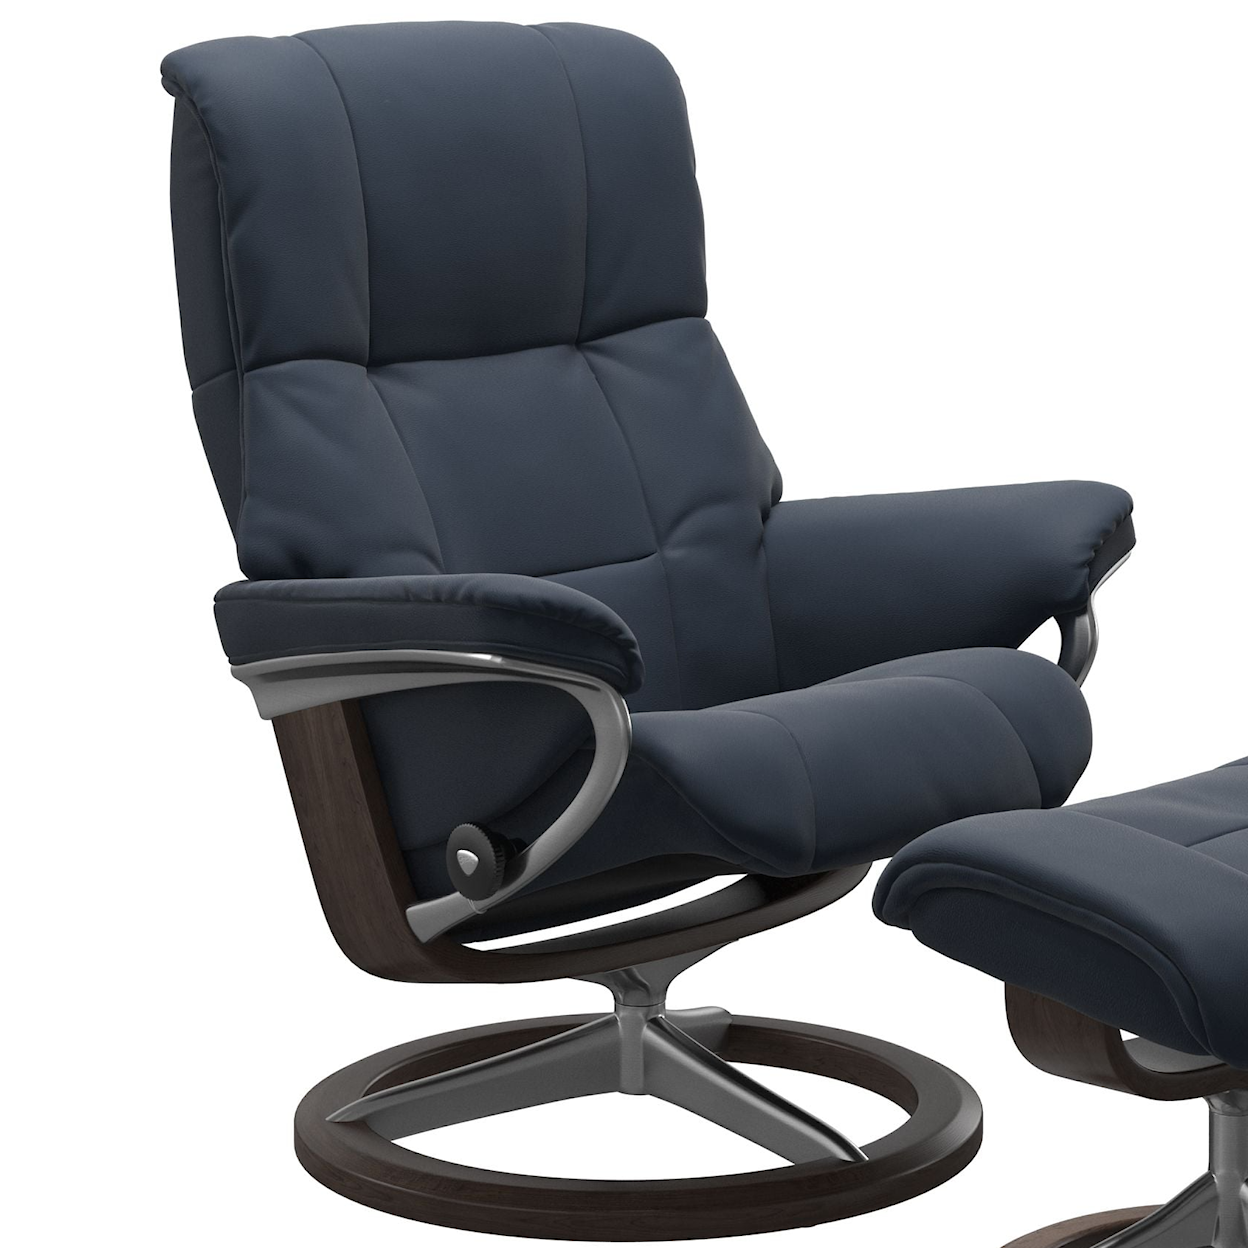 Stressless by Ekornes Mayfair Medium Reclining Chair with Signature Base